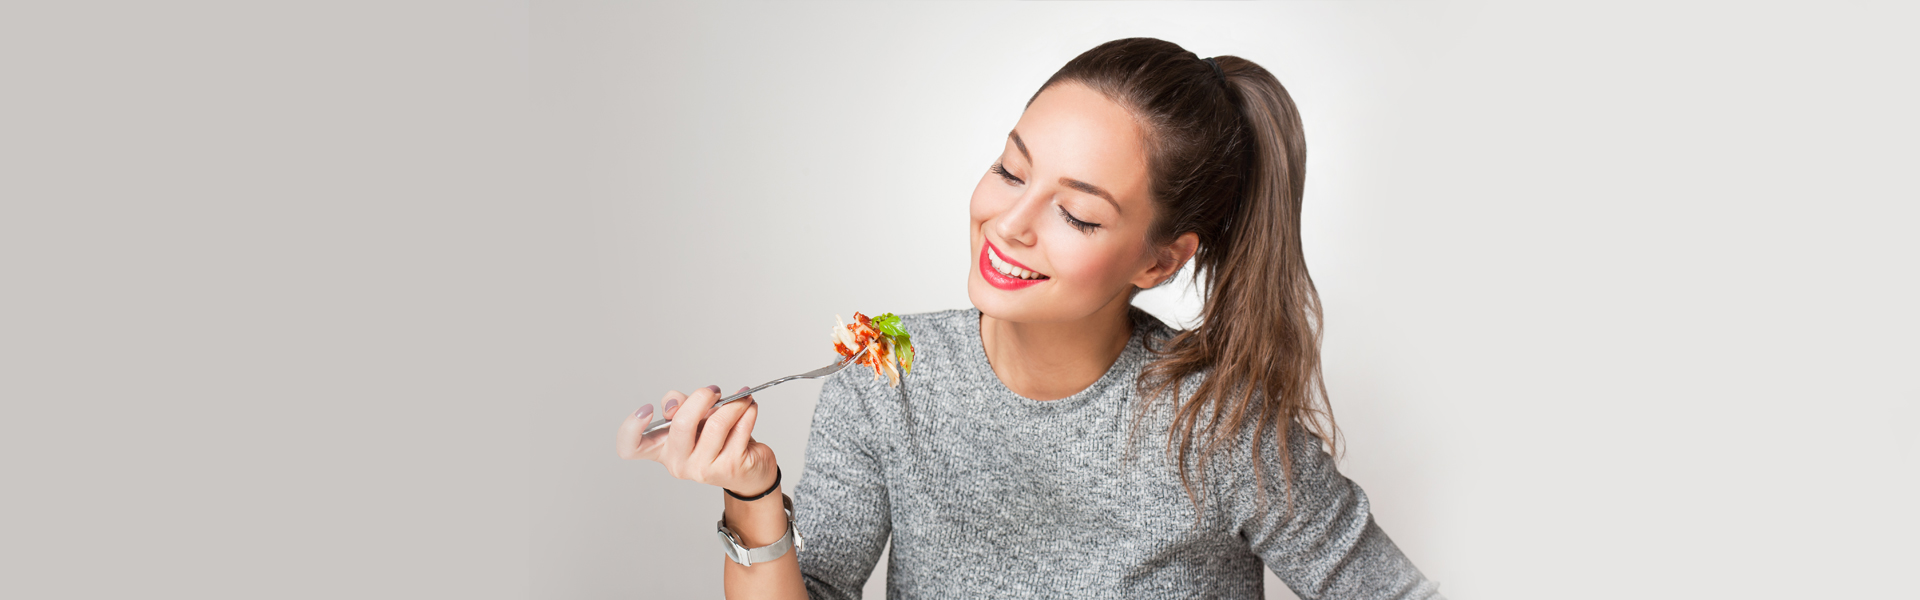 You’re What you Eat? Know the Link between Nutrition and Dentition!